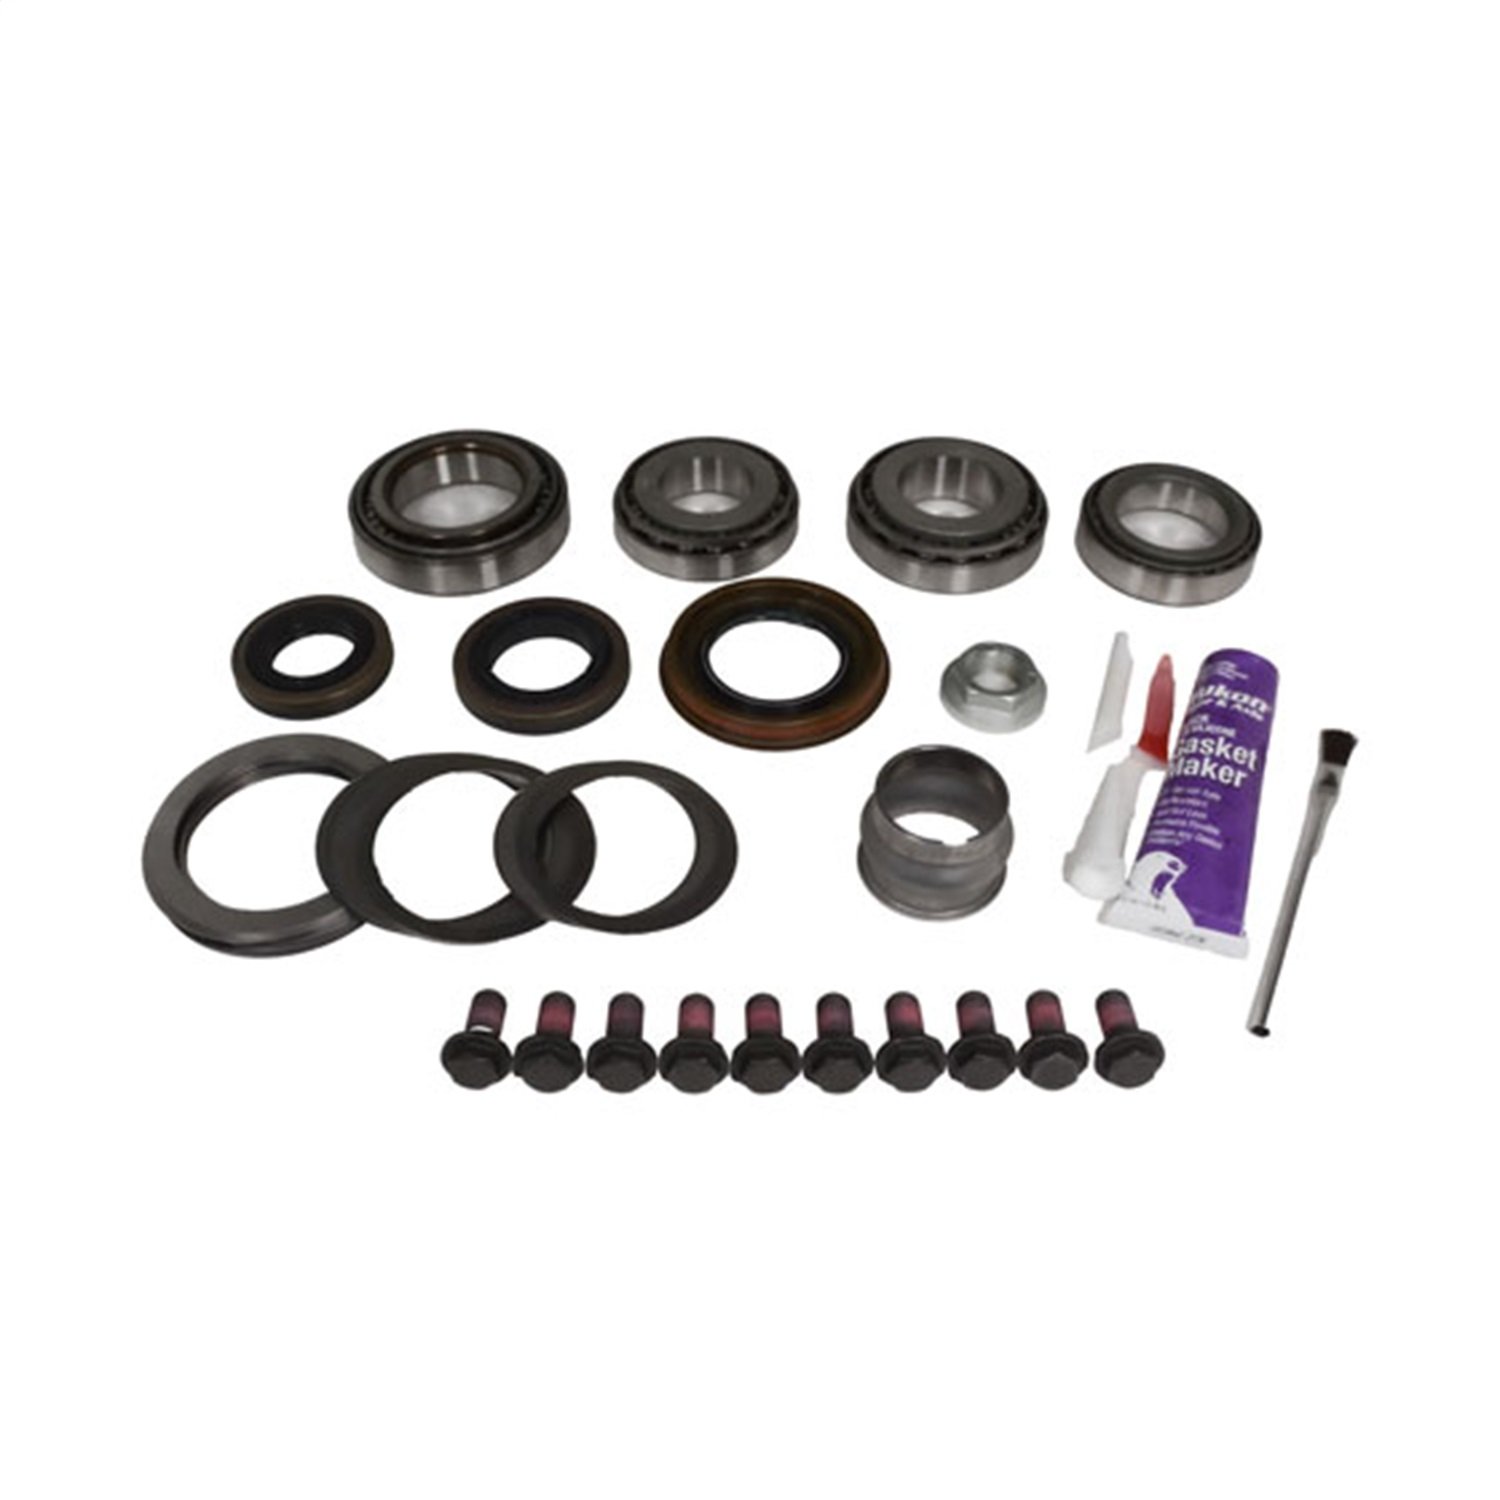 USA Standard 11331 Gear Master Overhaul Kit, For Dana 44/210Mm Front Differential